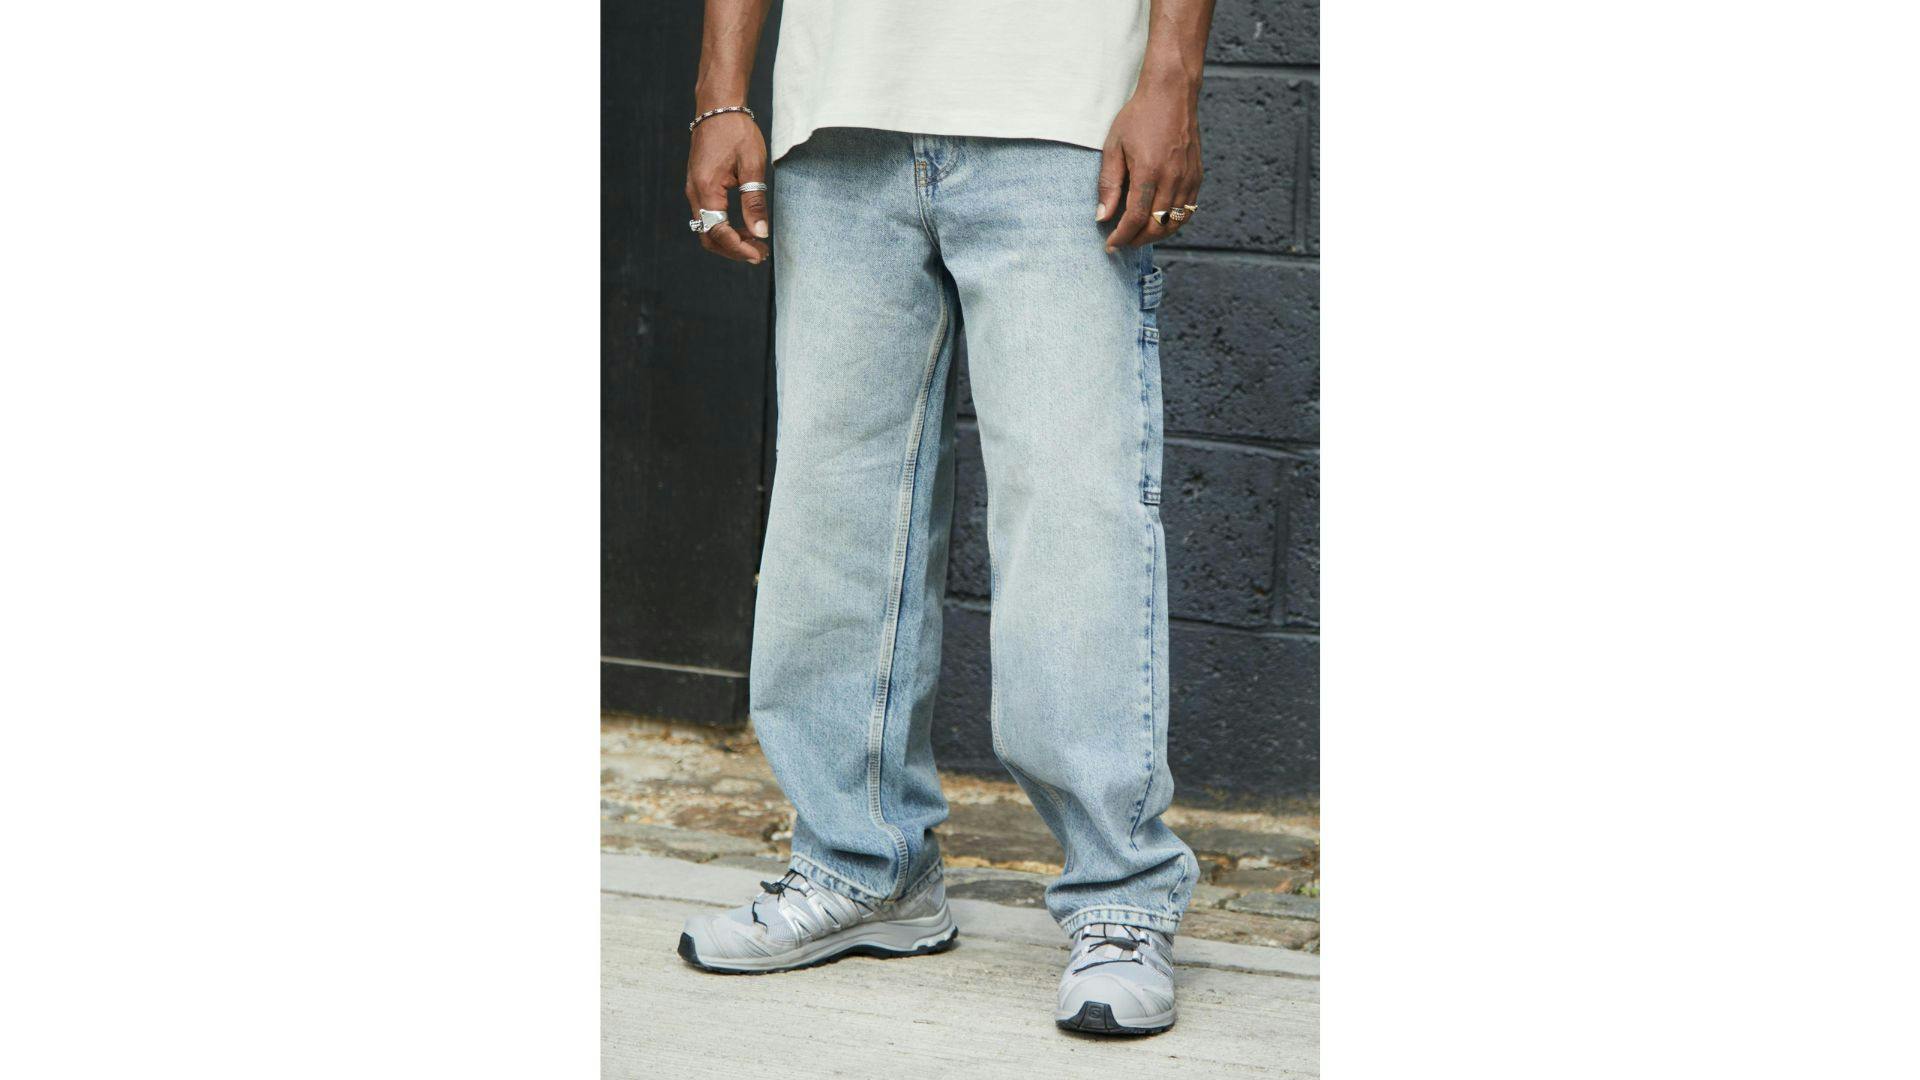 One of the best seller of Urban Outfitters is BDG Organic Light-Wash Carpenter Jeans